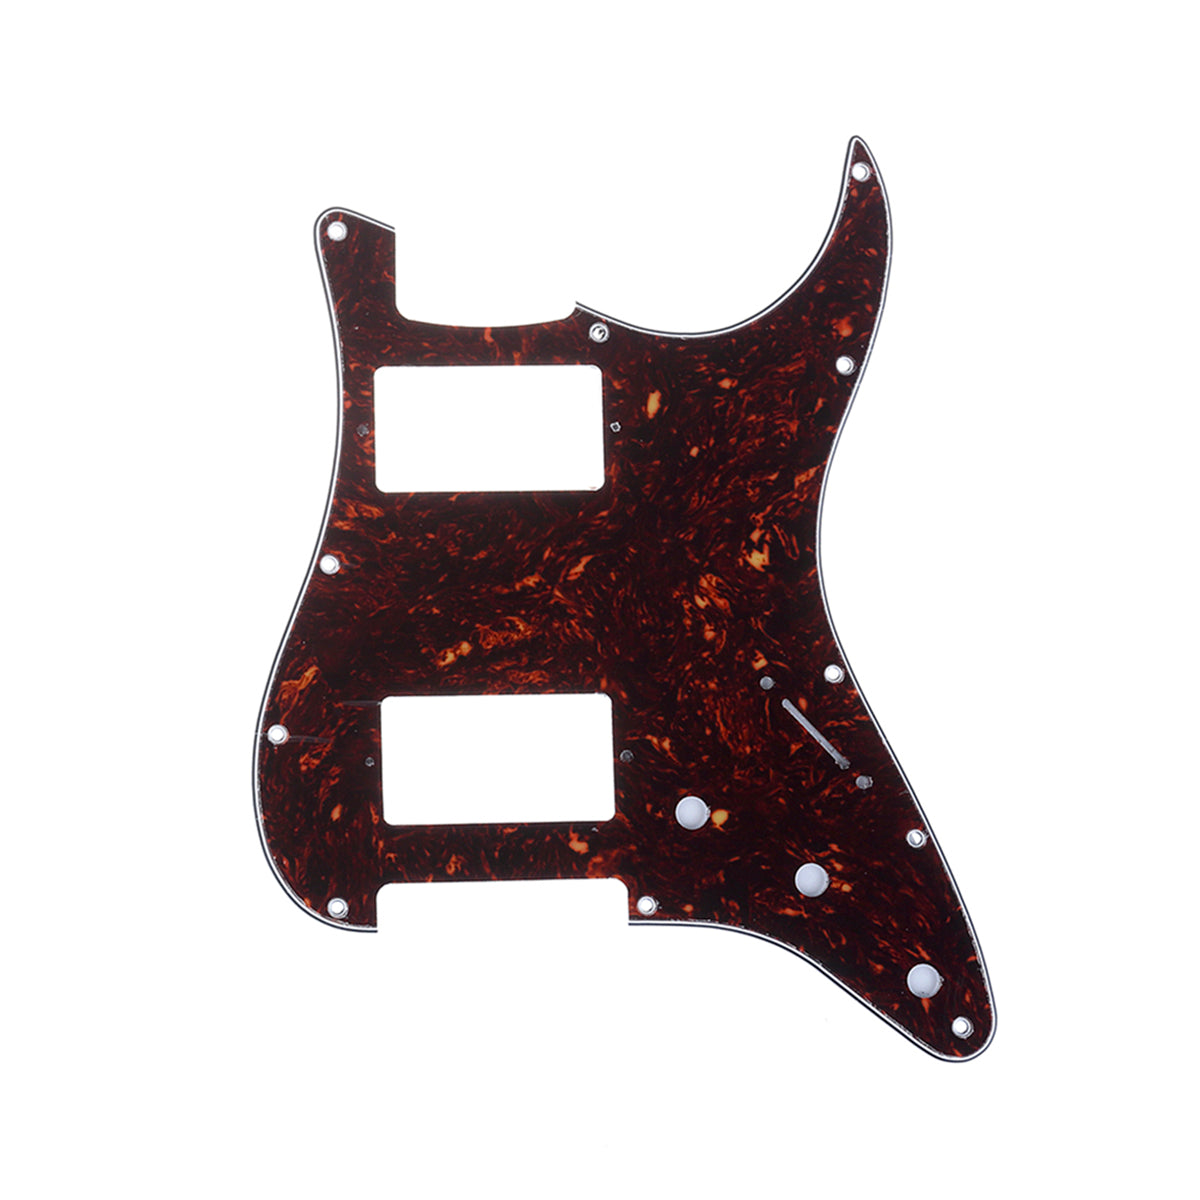 Musiclily Pro 11 Hole Guitar Strat Pickguard HH for American/Mexican Fender Standard Stratocaster Modern Style, 4Ply Tortoise Shell